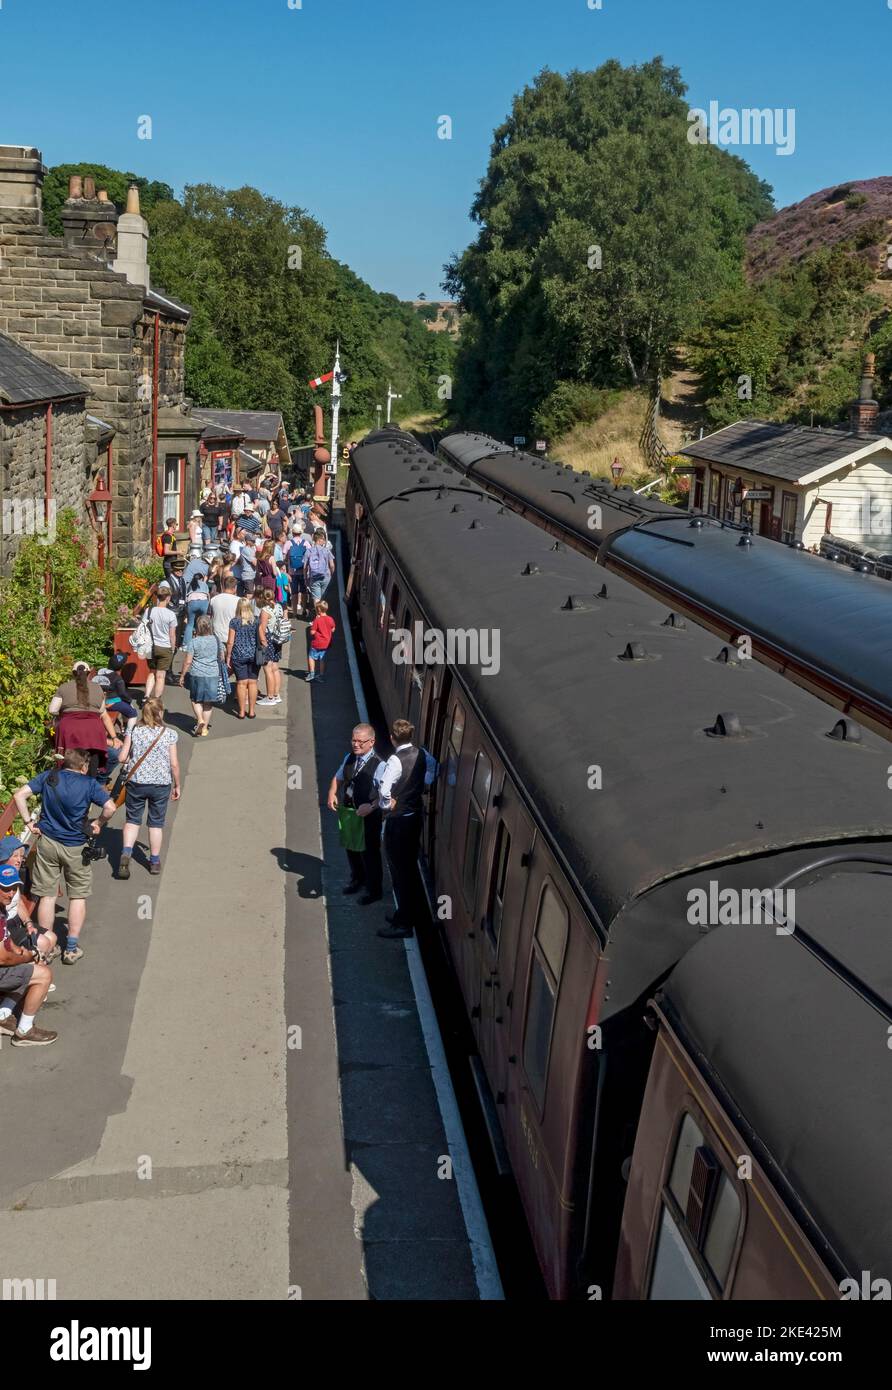 People tourists visitors on Goathland steam train station platform in summer North Yorkshire Moors Railway near Whitby North Yorkshire England UK Stock Photo